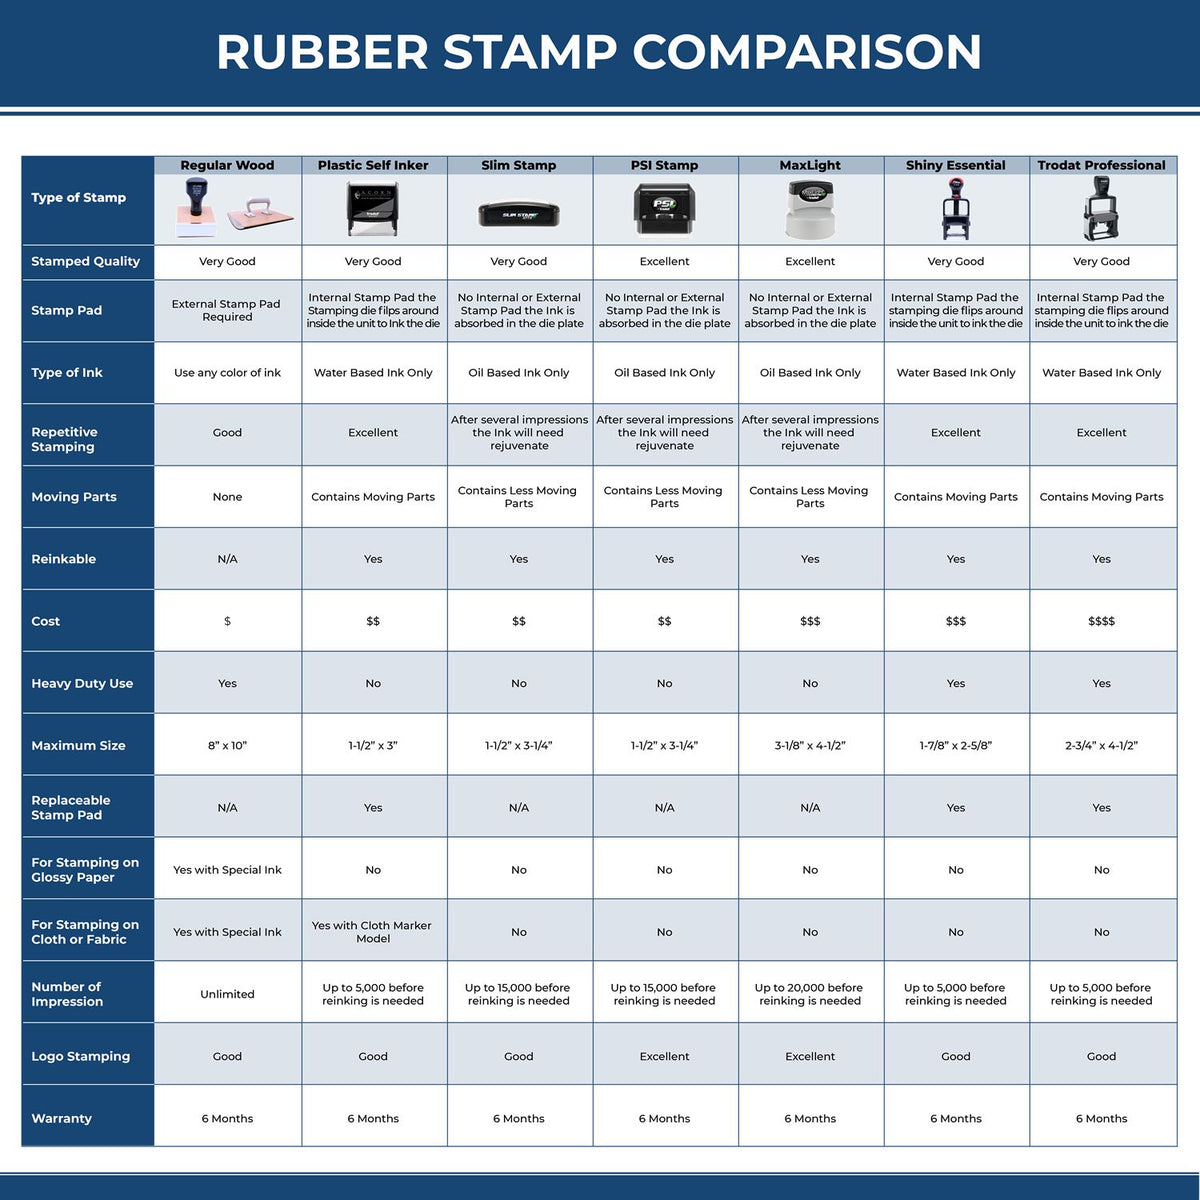 A comparison chart for the different types of mount models available for the Ohio Professional Engineer Seal Stamp.